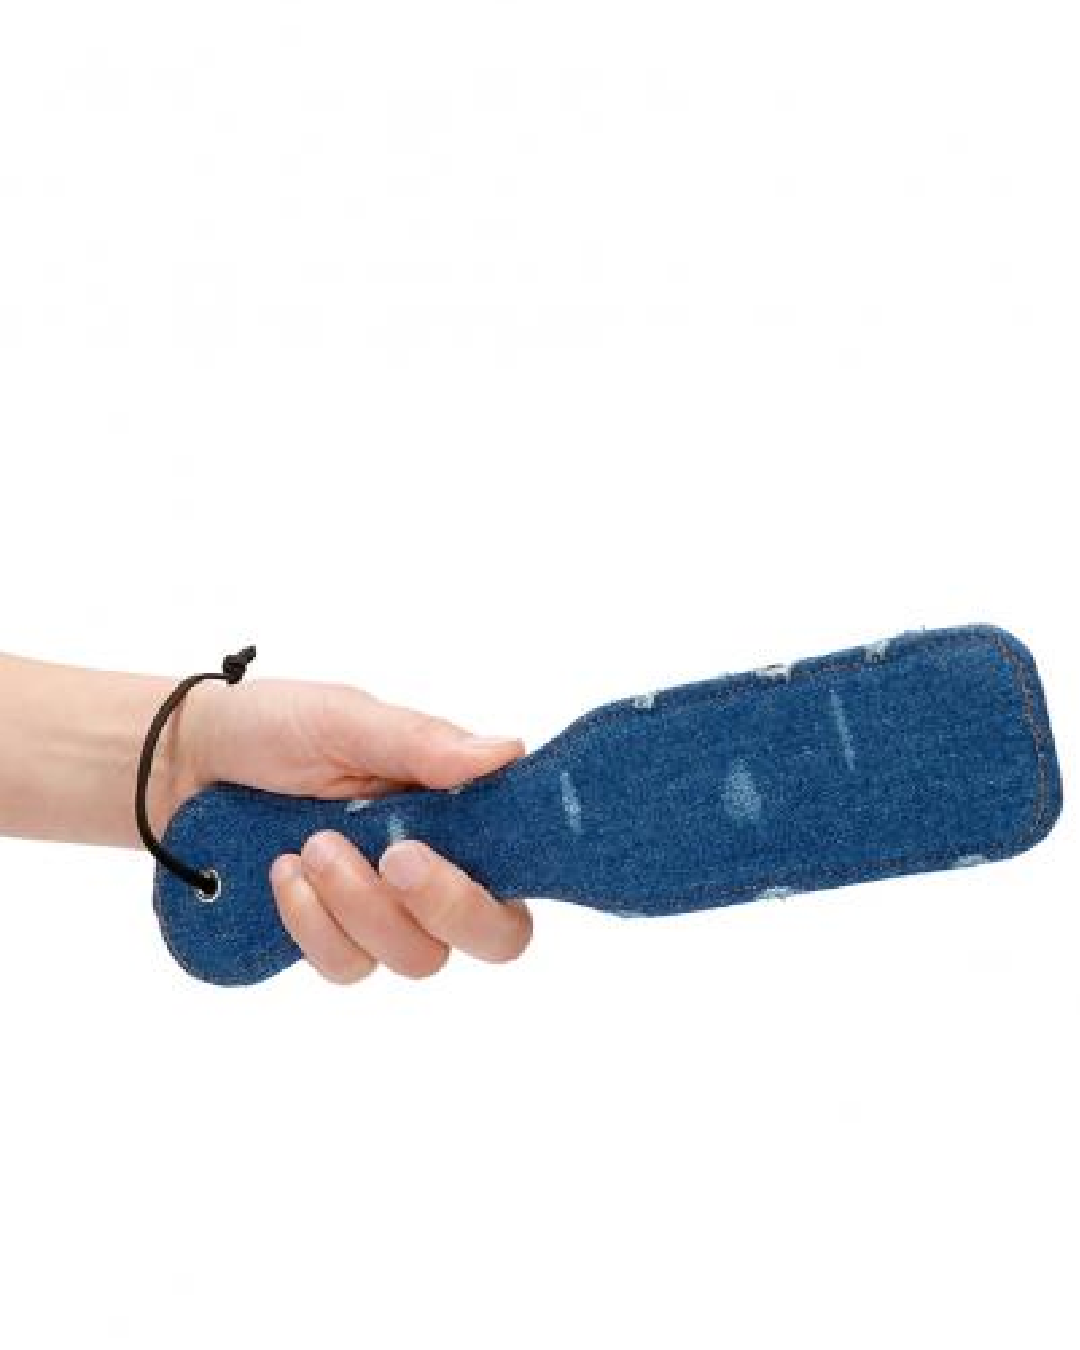 model holding Ouch! Roughend Denim Style Paddle - Blue